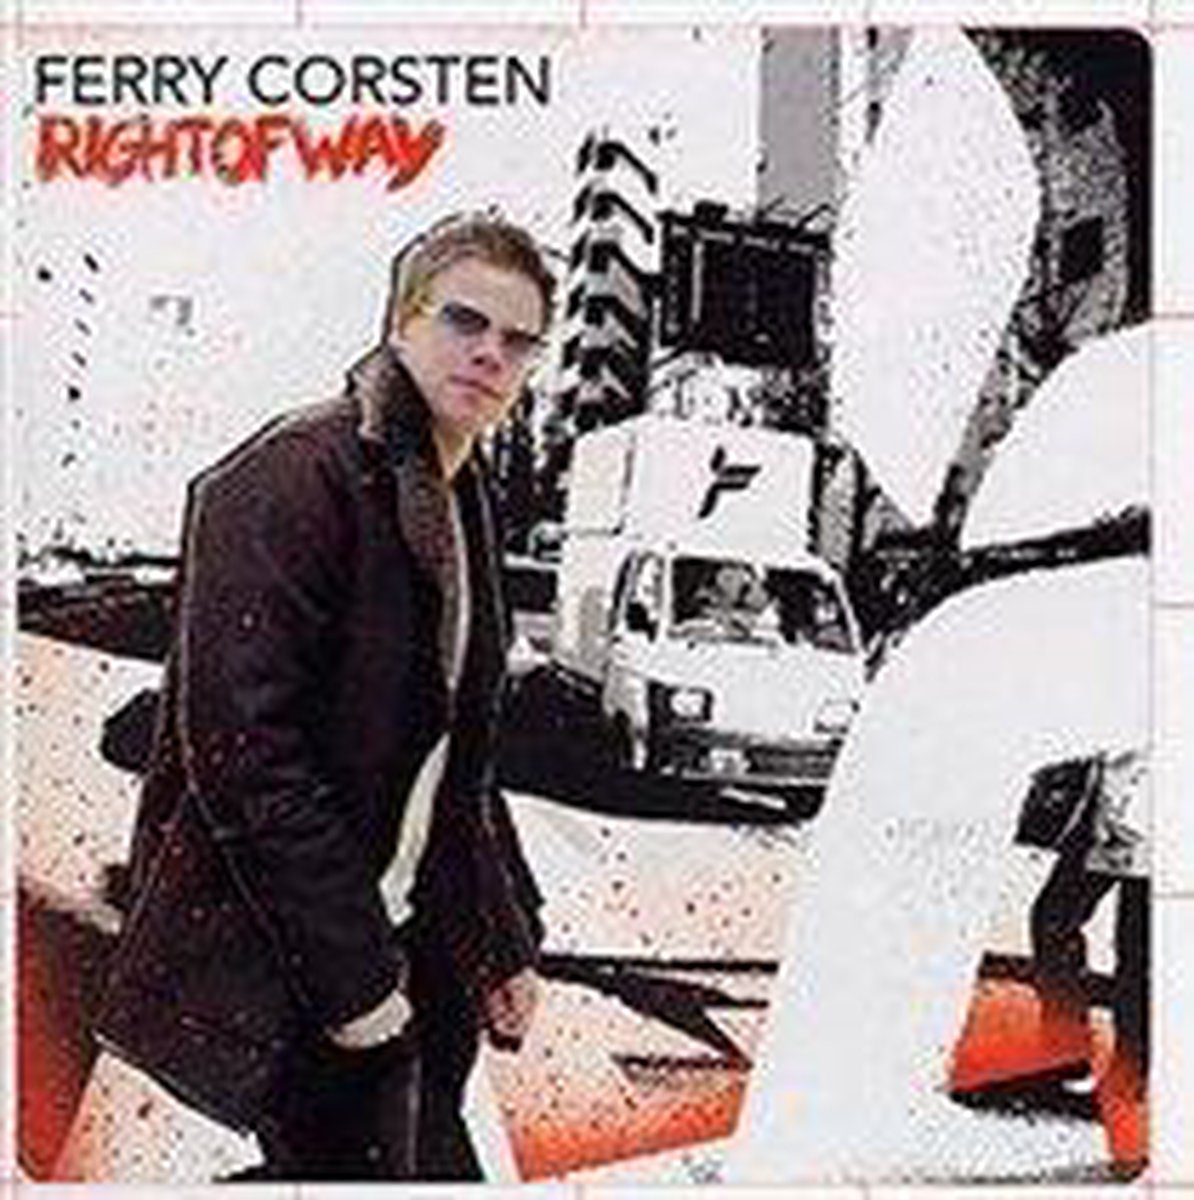 Right of Way - Ferry Corsten